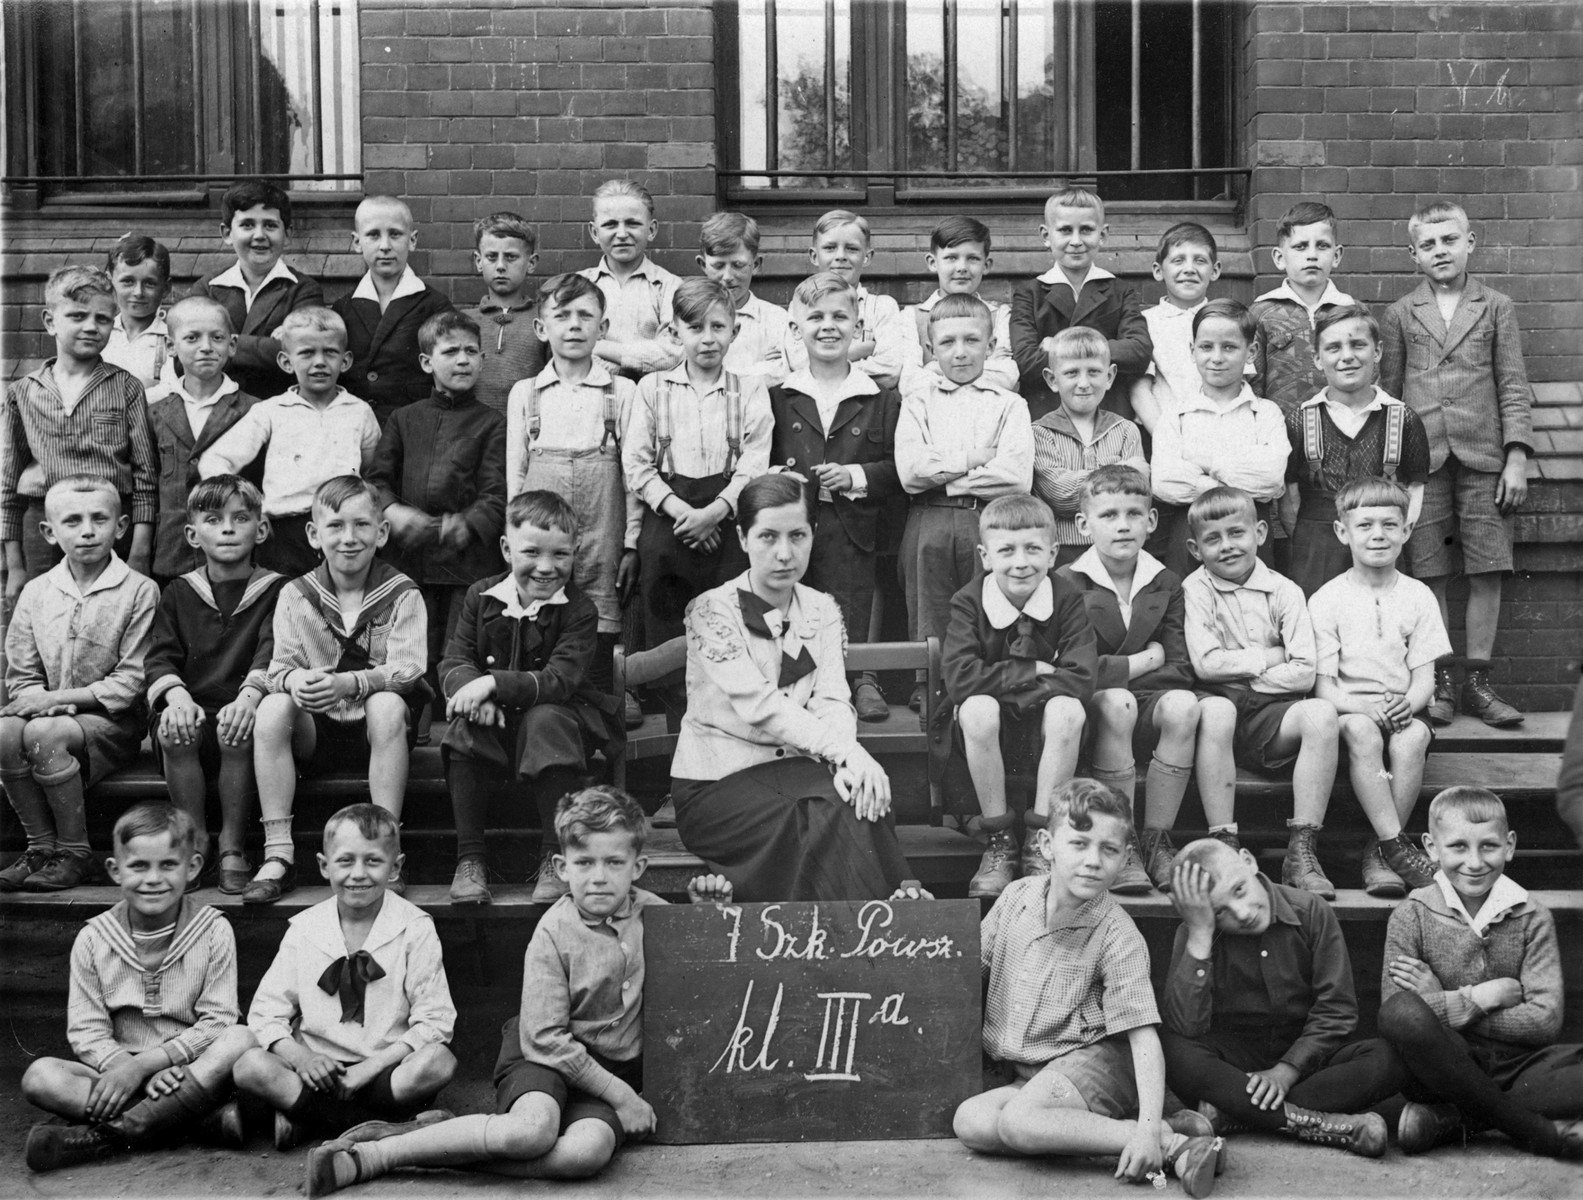 Group portrait of students in the third class of a Polish elementary school in Poznan.

Among those pictured is a Jewish child, Zygmunt Bauman (top row, left) who is the donor's father.